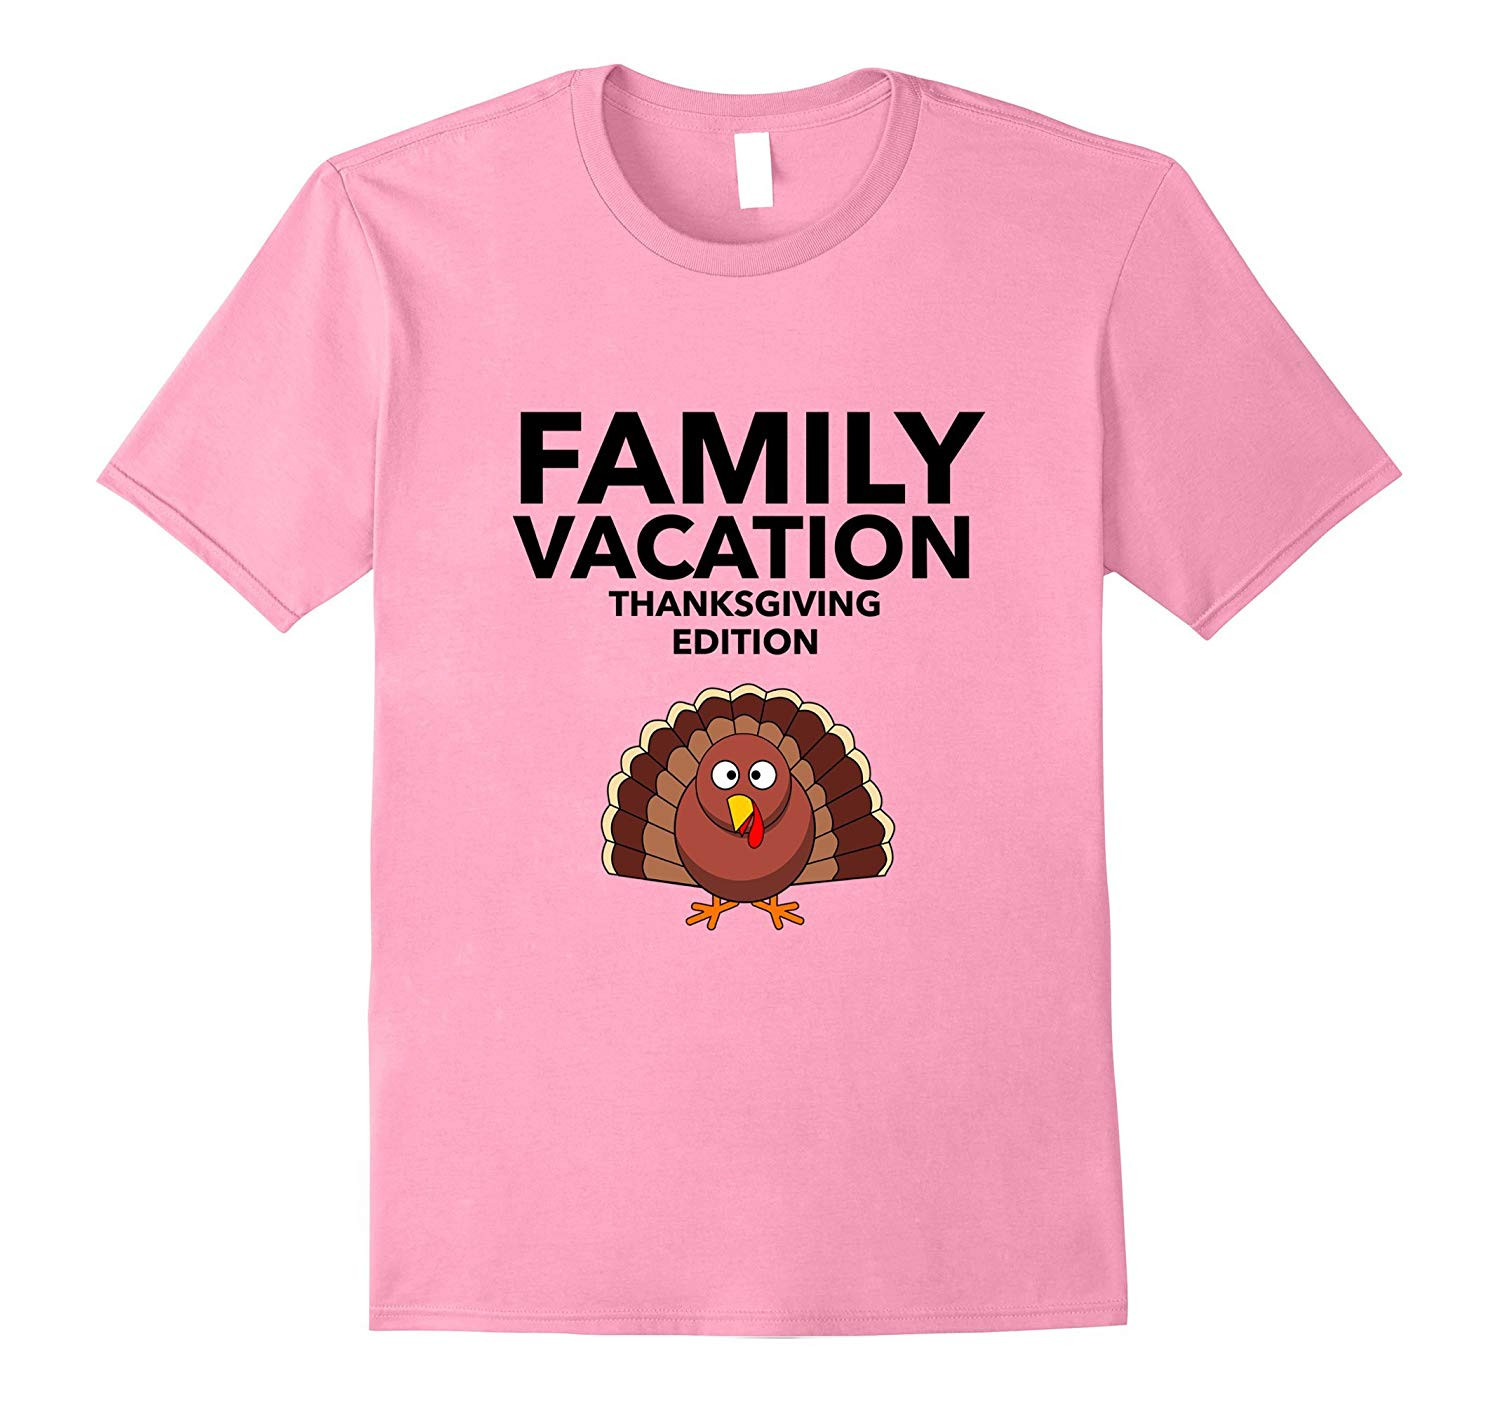 Thanksgiving Vacation Ideas For Families
 Thanksgiving “Family Vacation Thanksgiving Edition” T